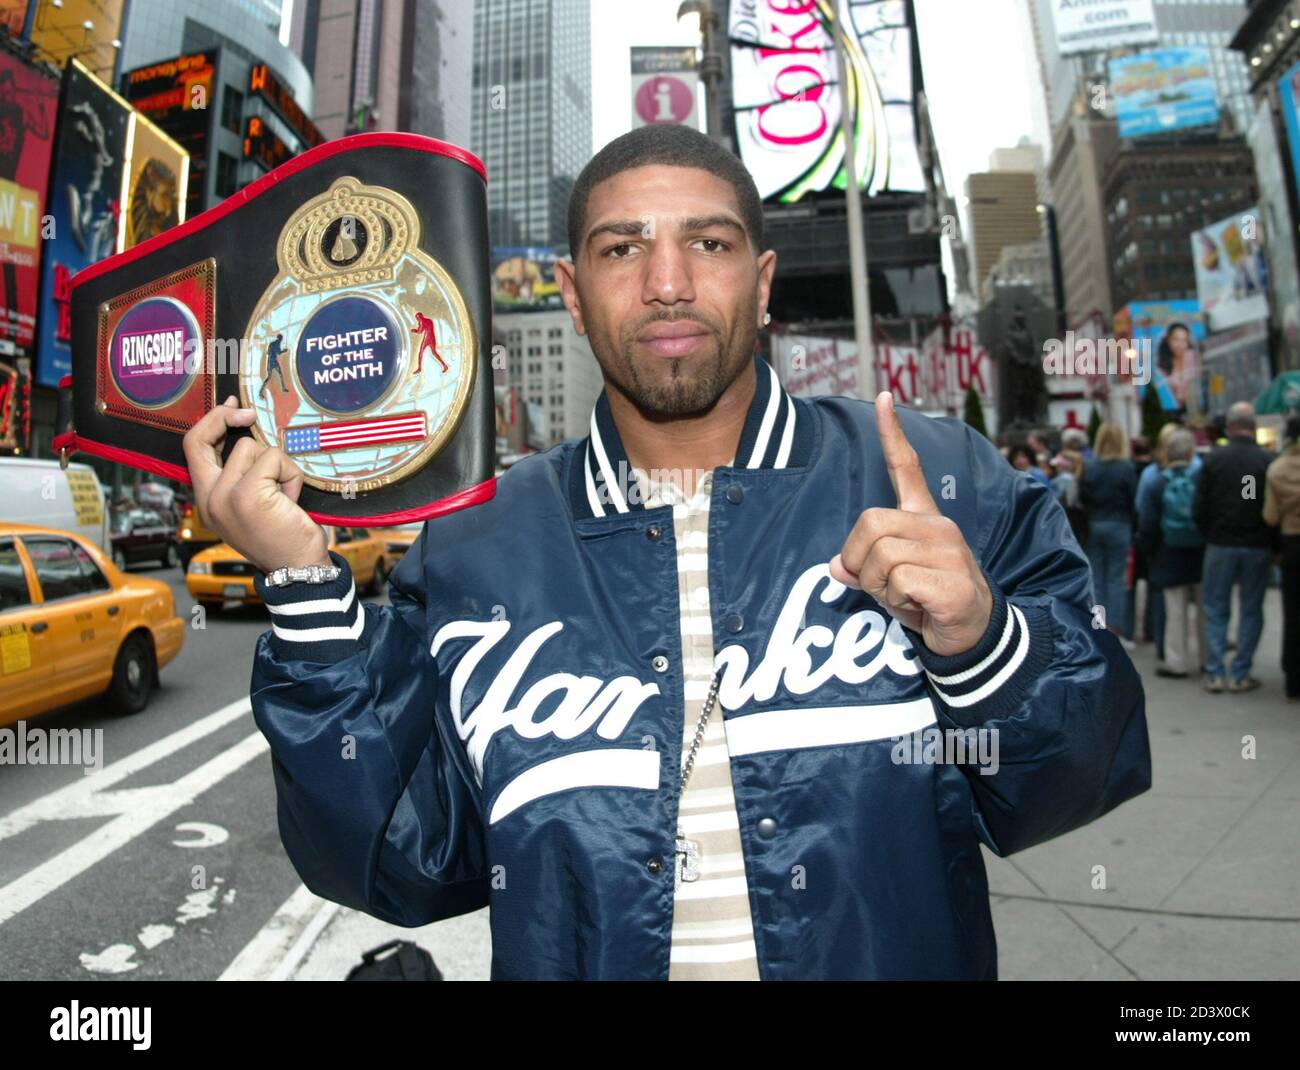 Boxer Ronald "Winky" Wright poses in a New York Yankees baseball jacket at  Times Square in New York, May 26, 2005. Wright, boxing's undisputed  middleweight champion, defeated Felix Trinidad last week by